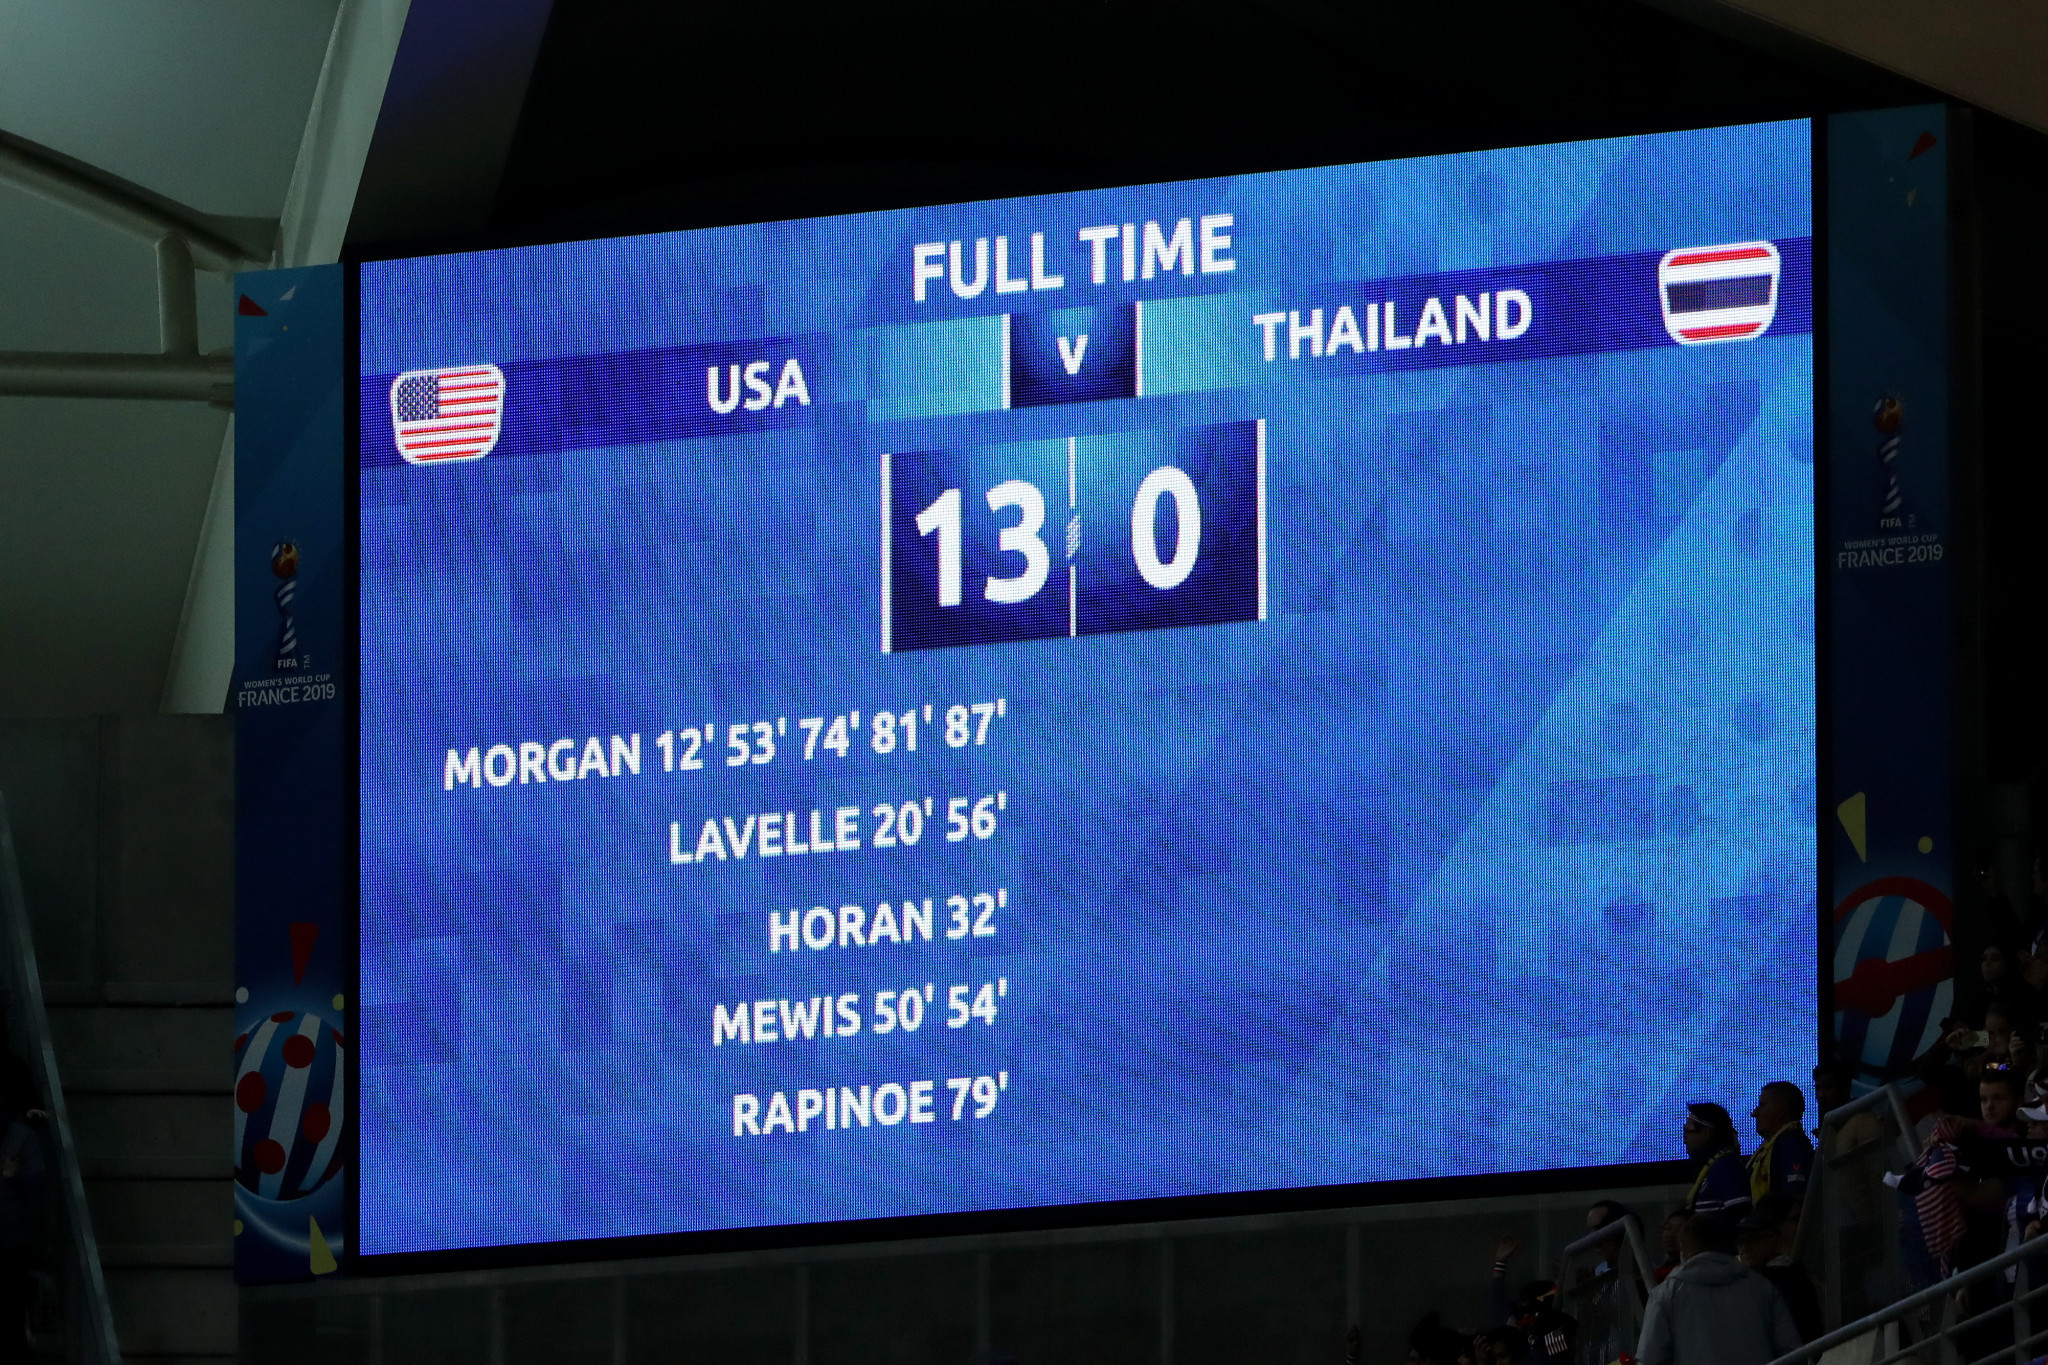 Thailand were on the wrong end of a 13-0 obliteration from USA back in 2019. GETTY IMAGES